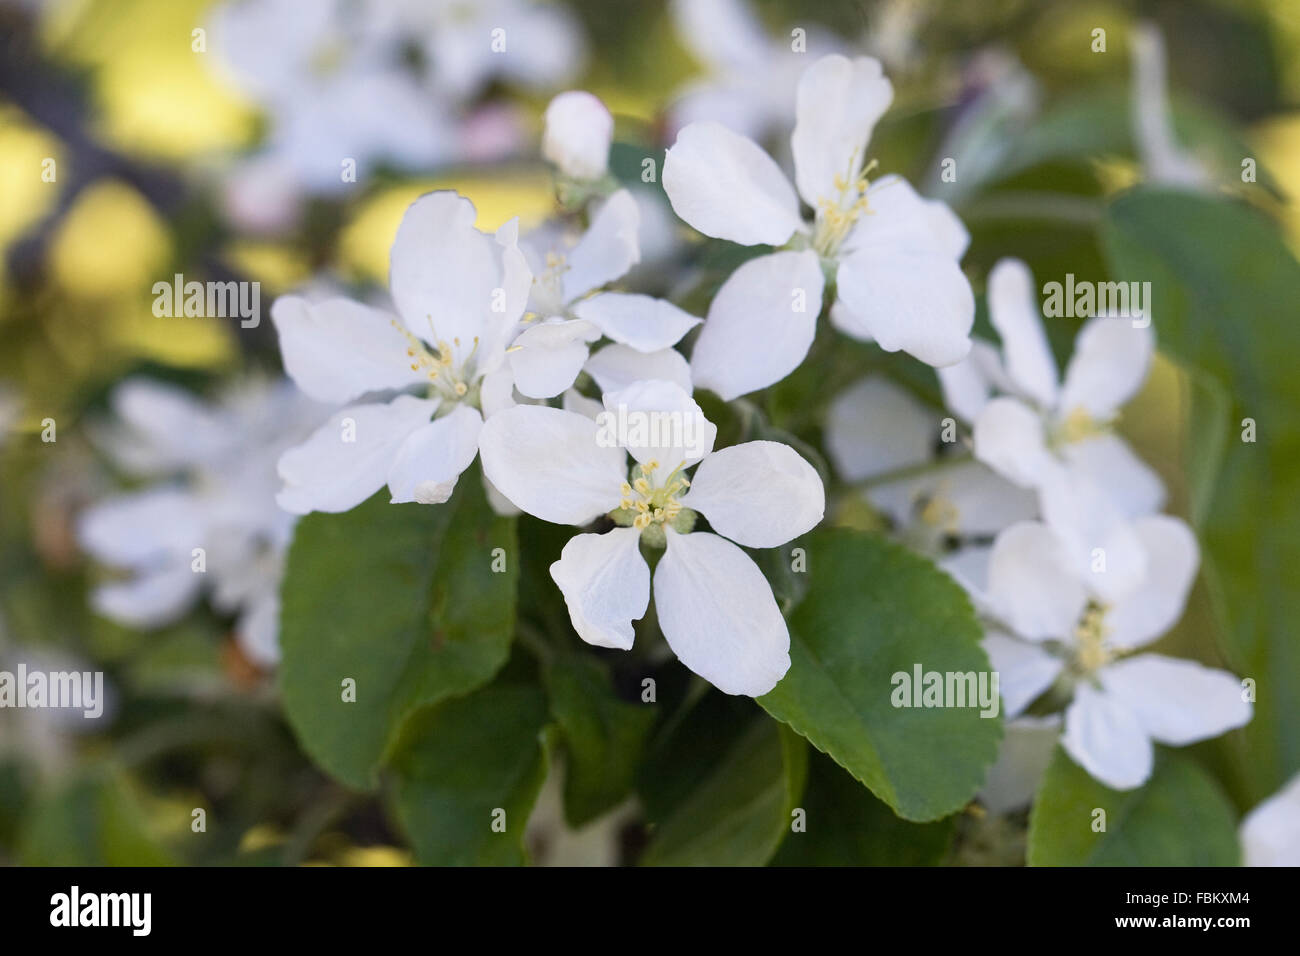 Malus spectabilis flowers. Apple blossom in Spring. Stock Photo